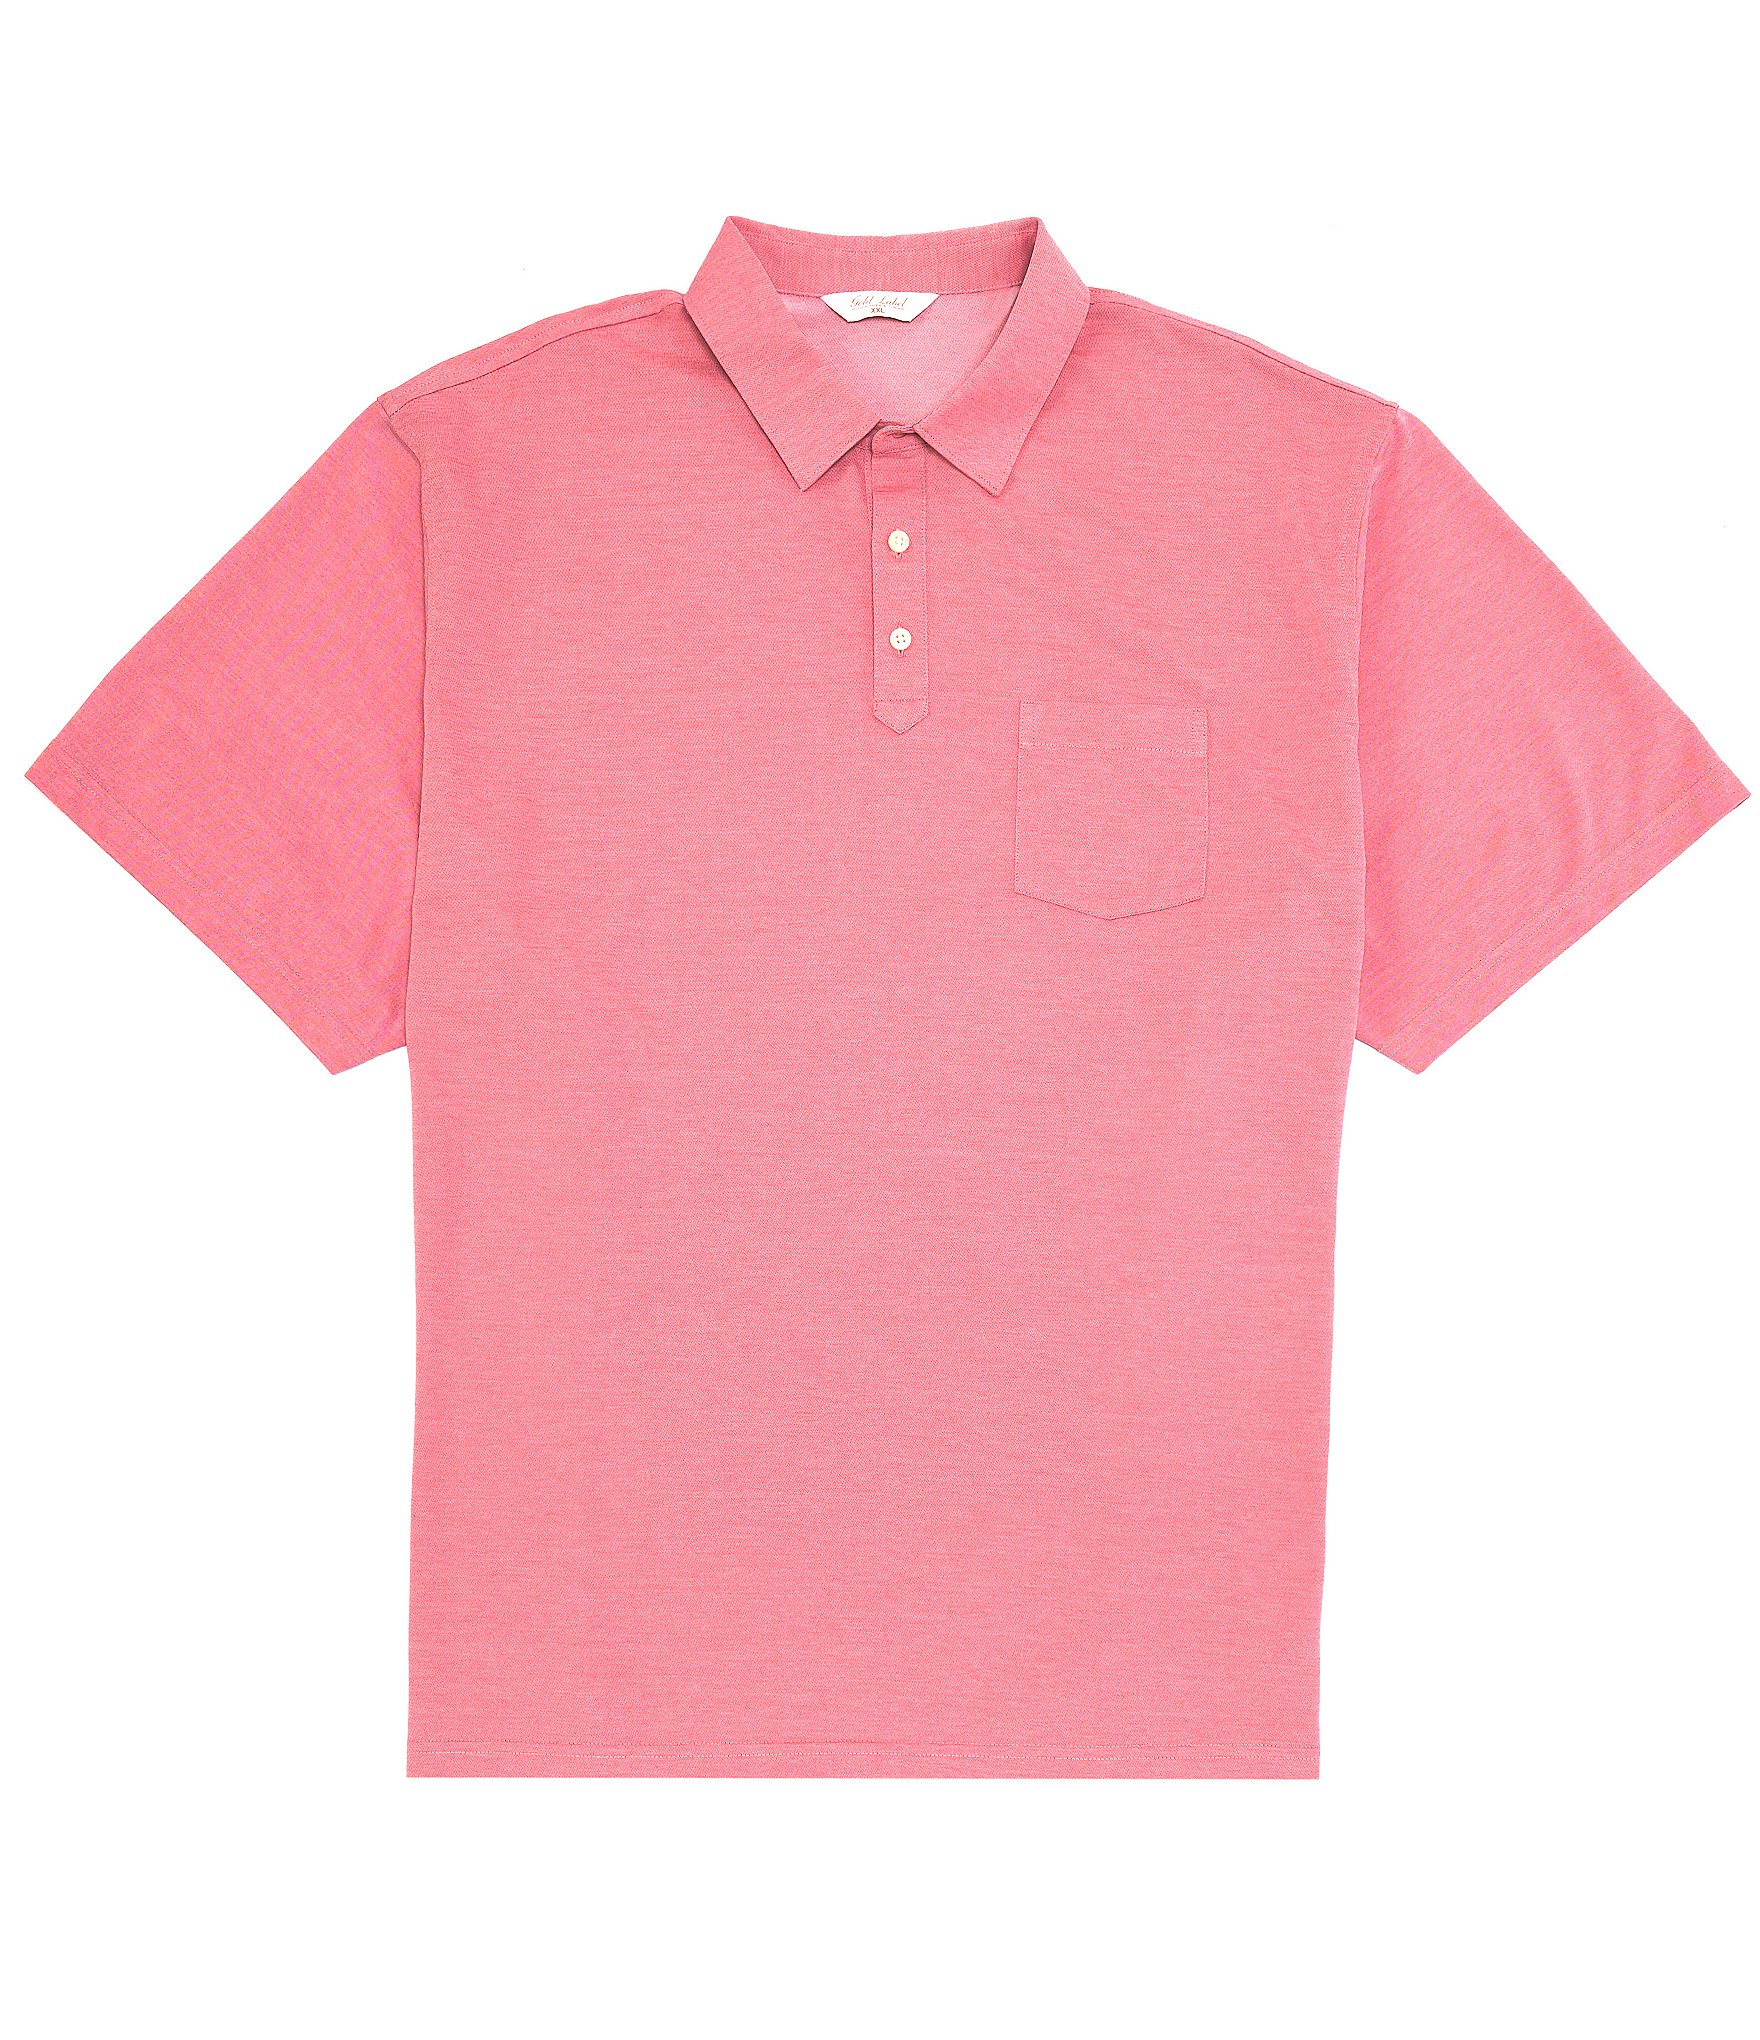 Gold Label Roundtree & Yorke Short Sleeve New Cool Polo | Dillard's